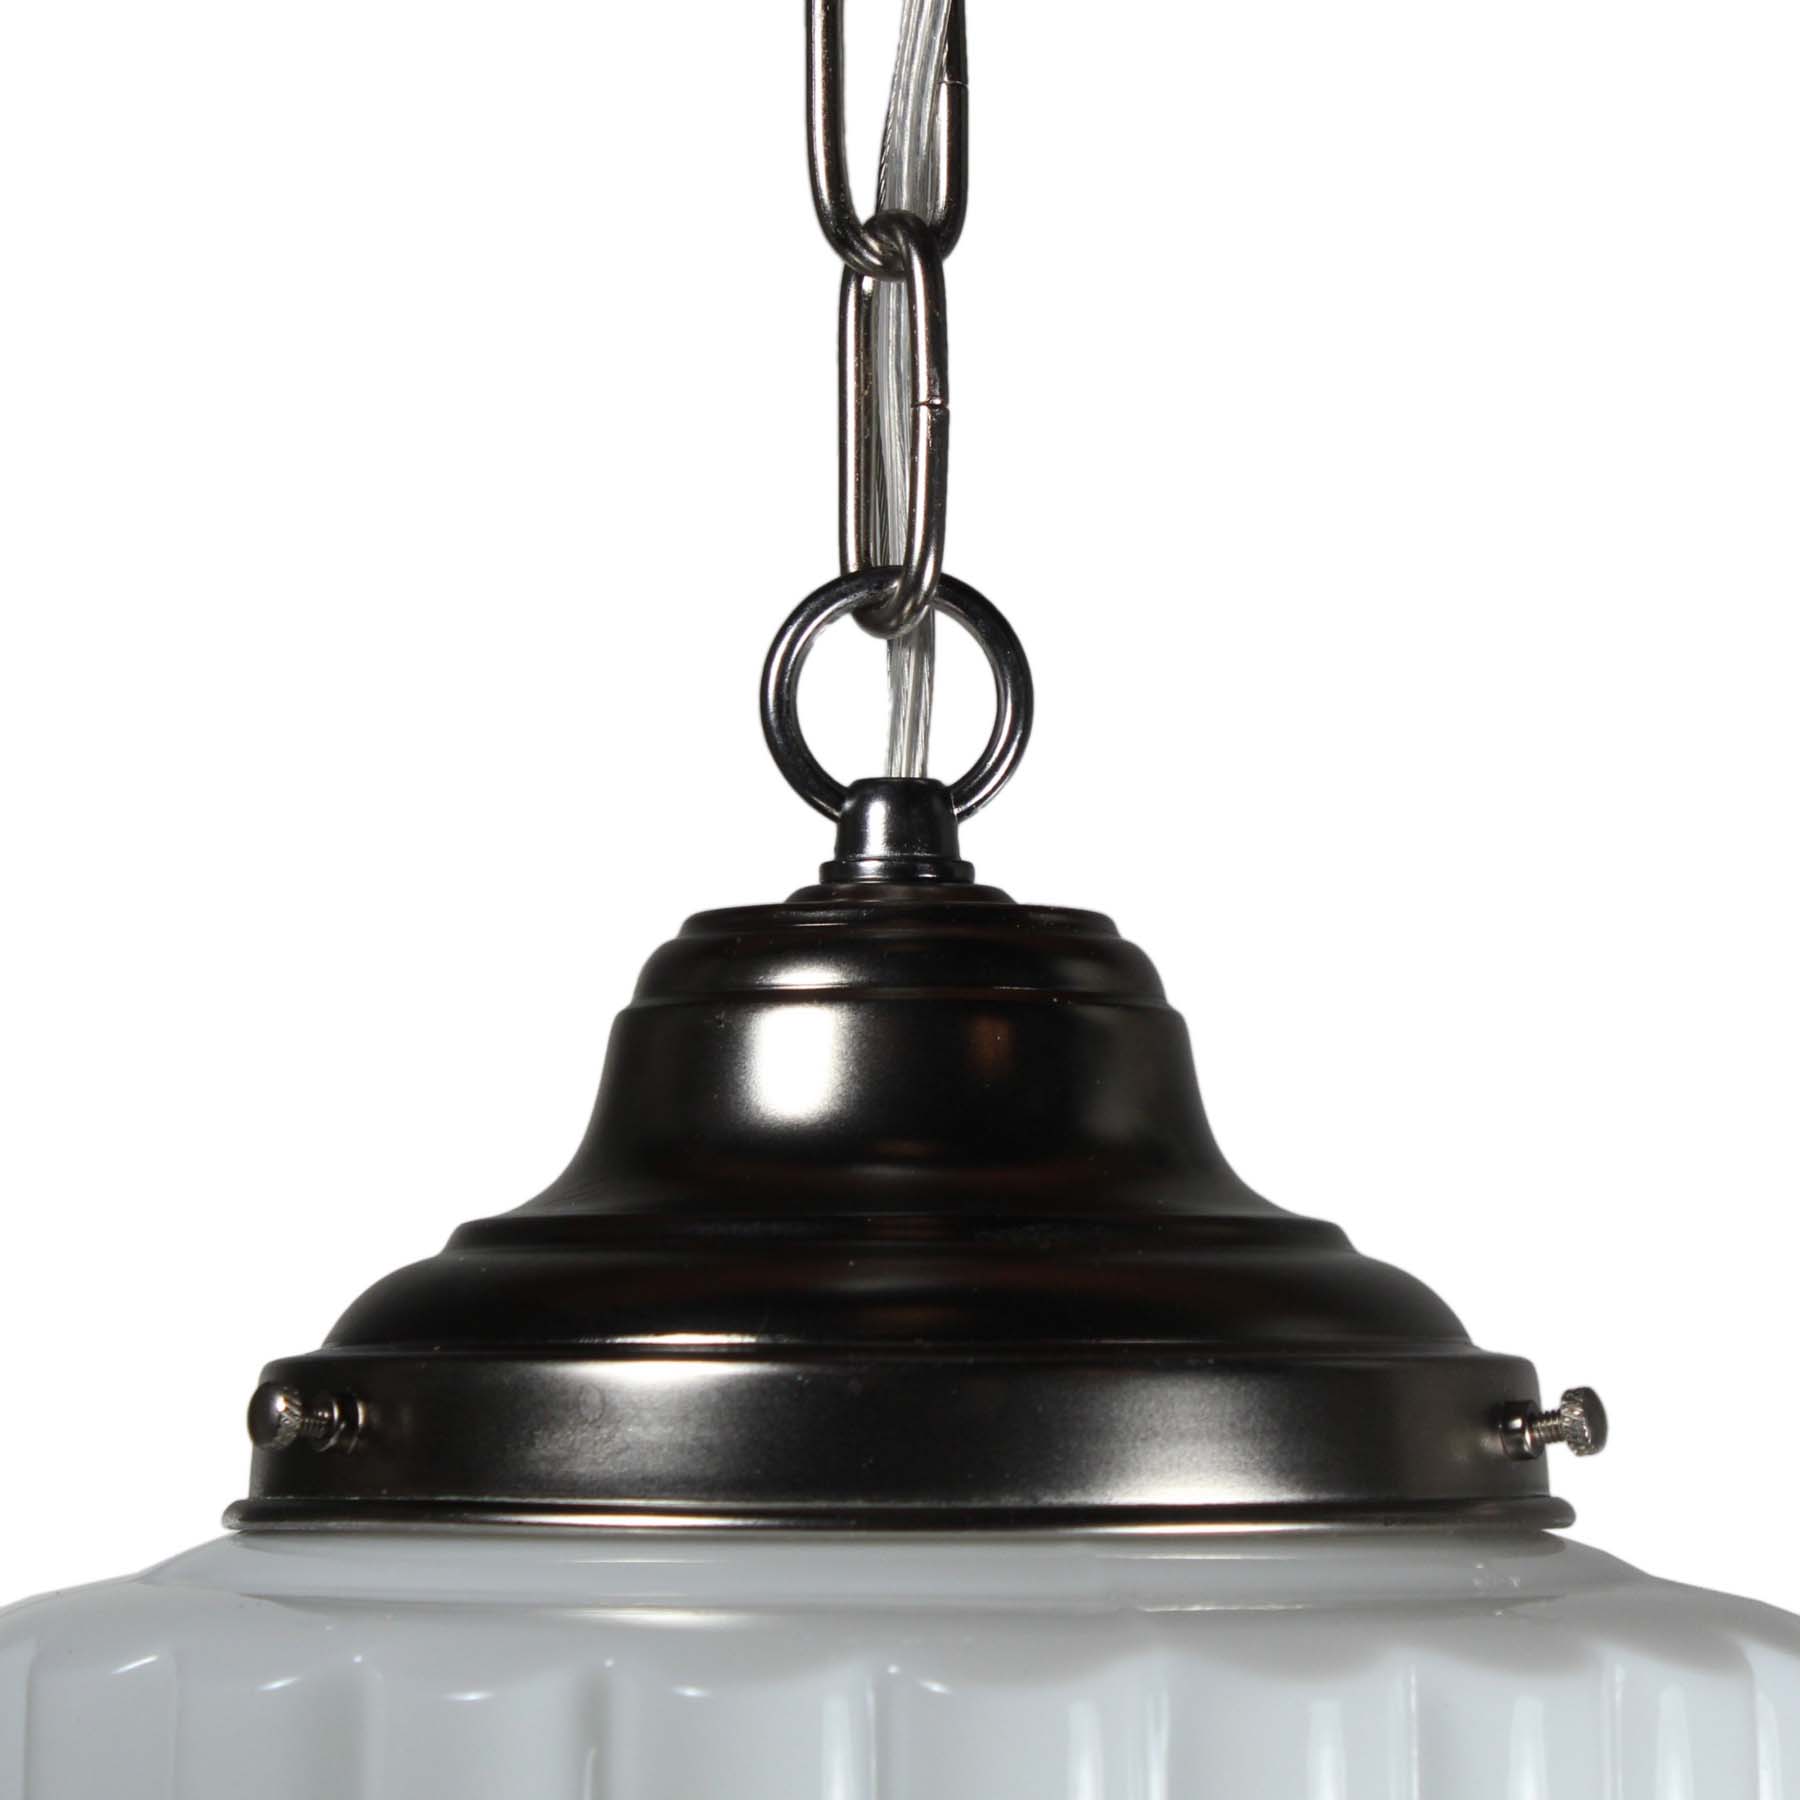 SOLD Art Deco Skyscraper Pendant Light with Two-Part Prismatic Shade, Antique Lighting-70522